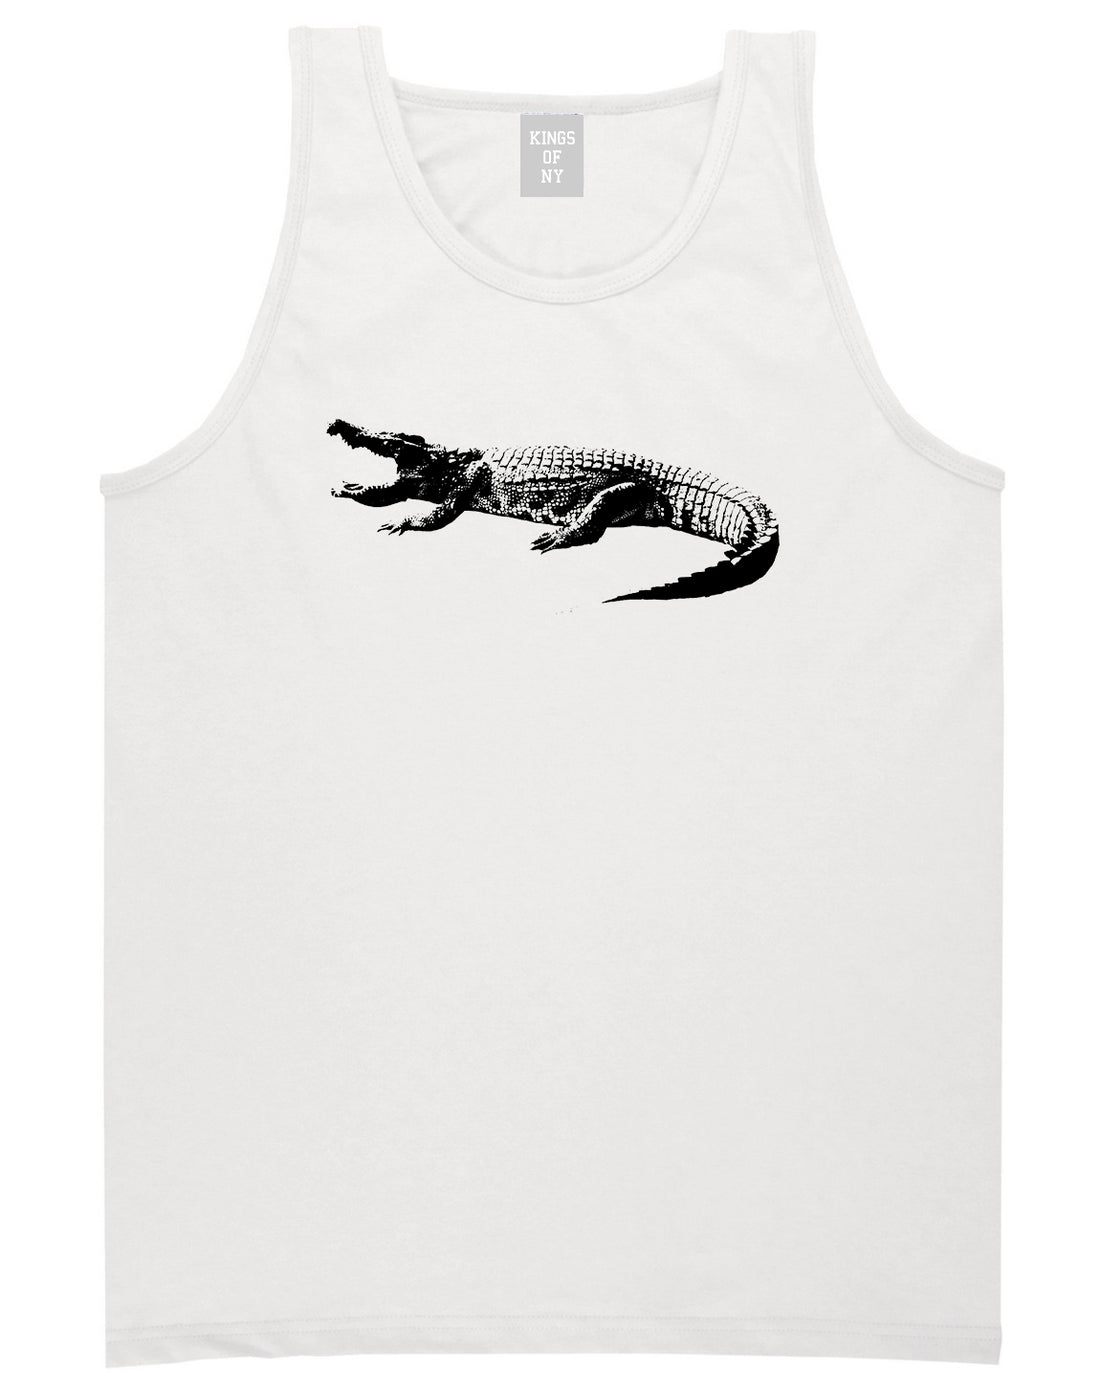 Alligator White Tank Top Shirt by Kings Of NY